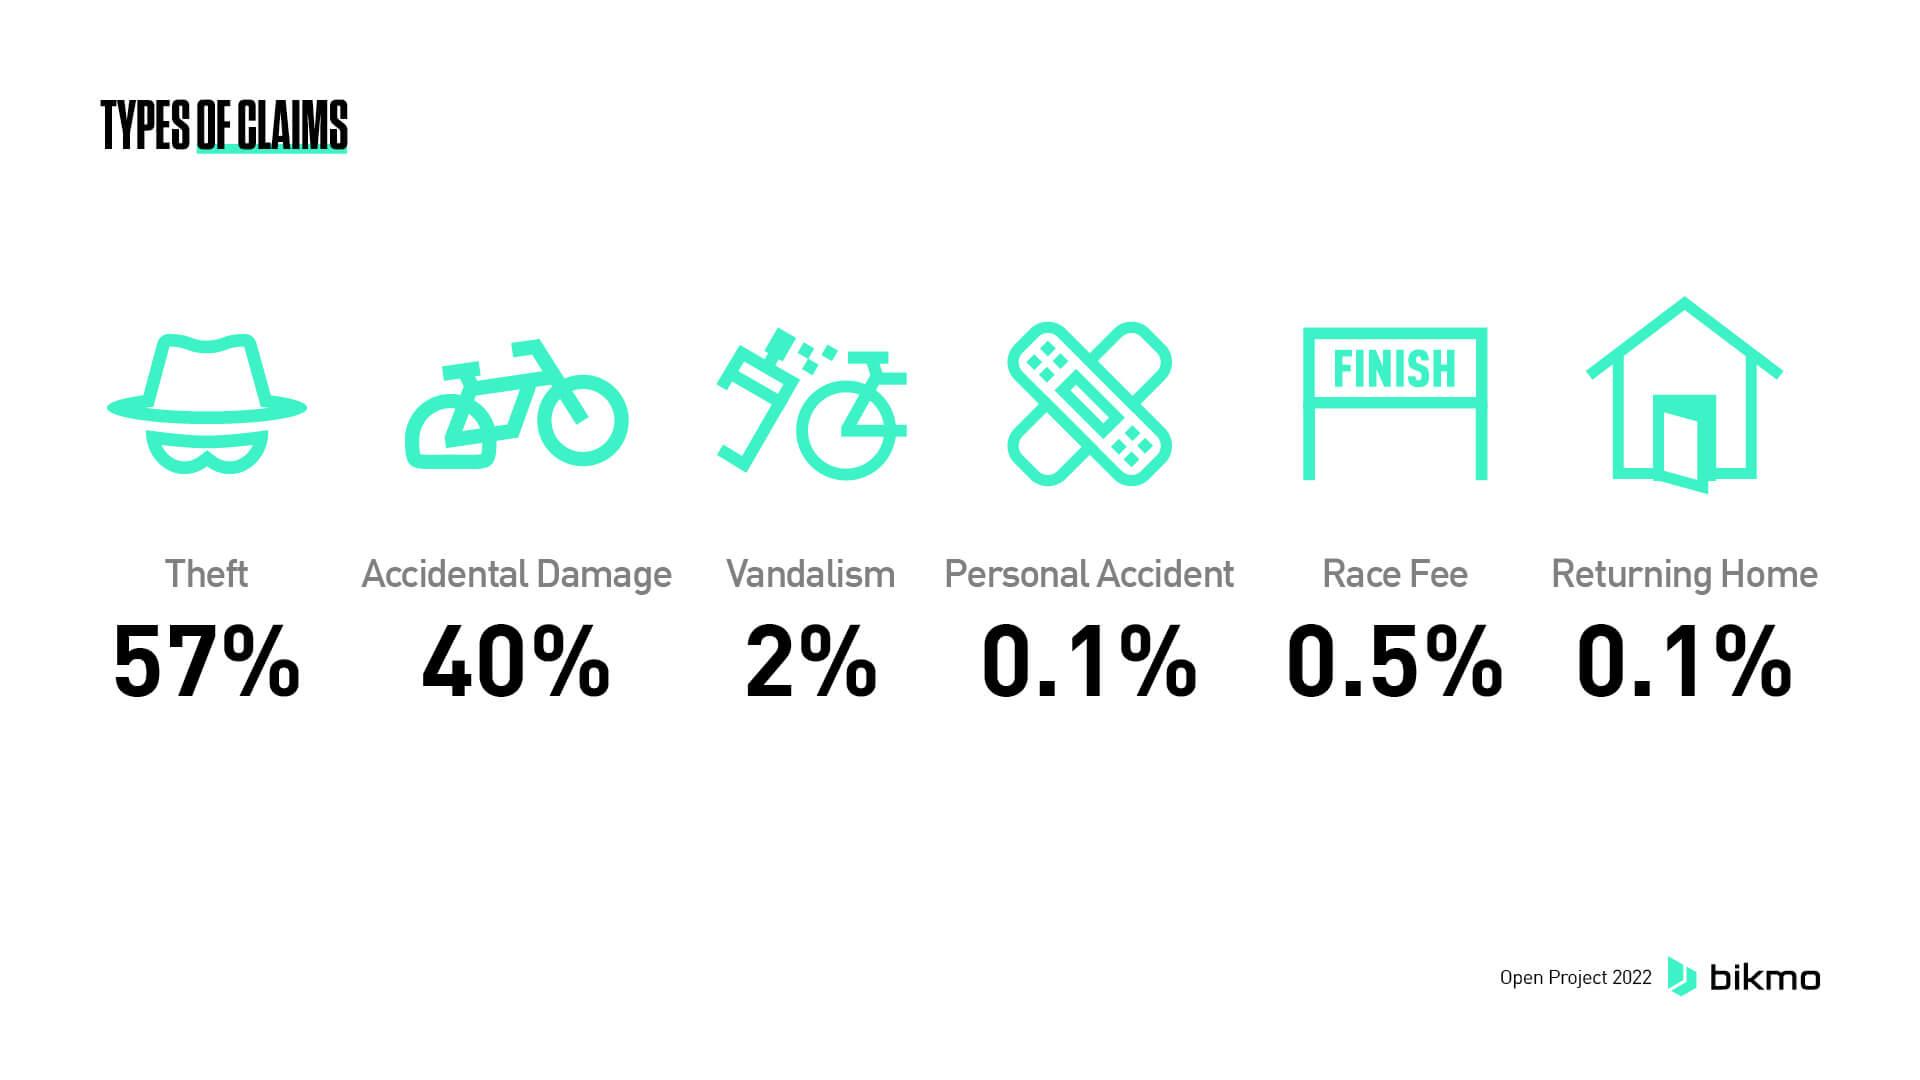 Types of claims against Bikmo cycle insurance